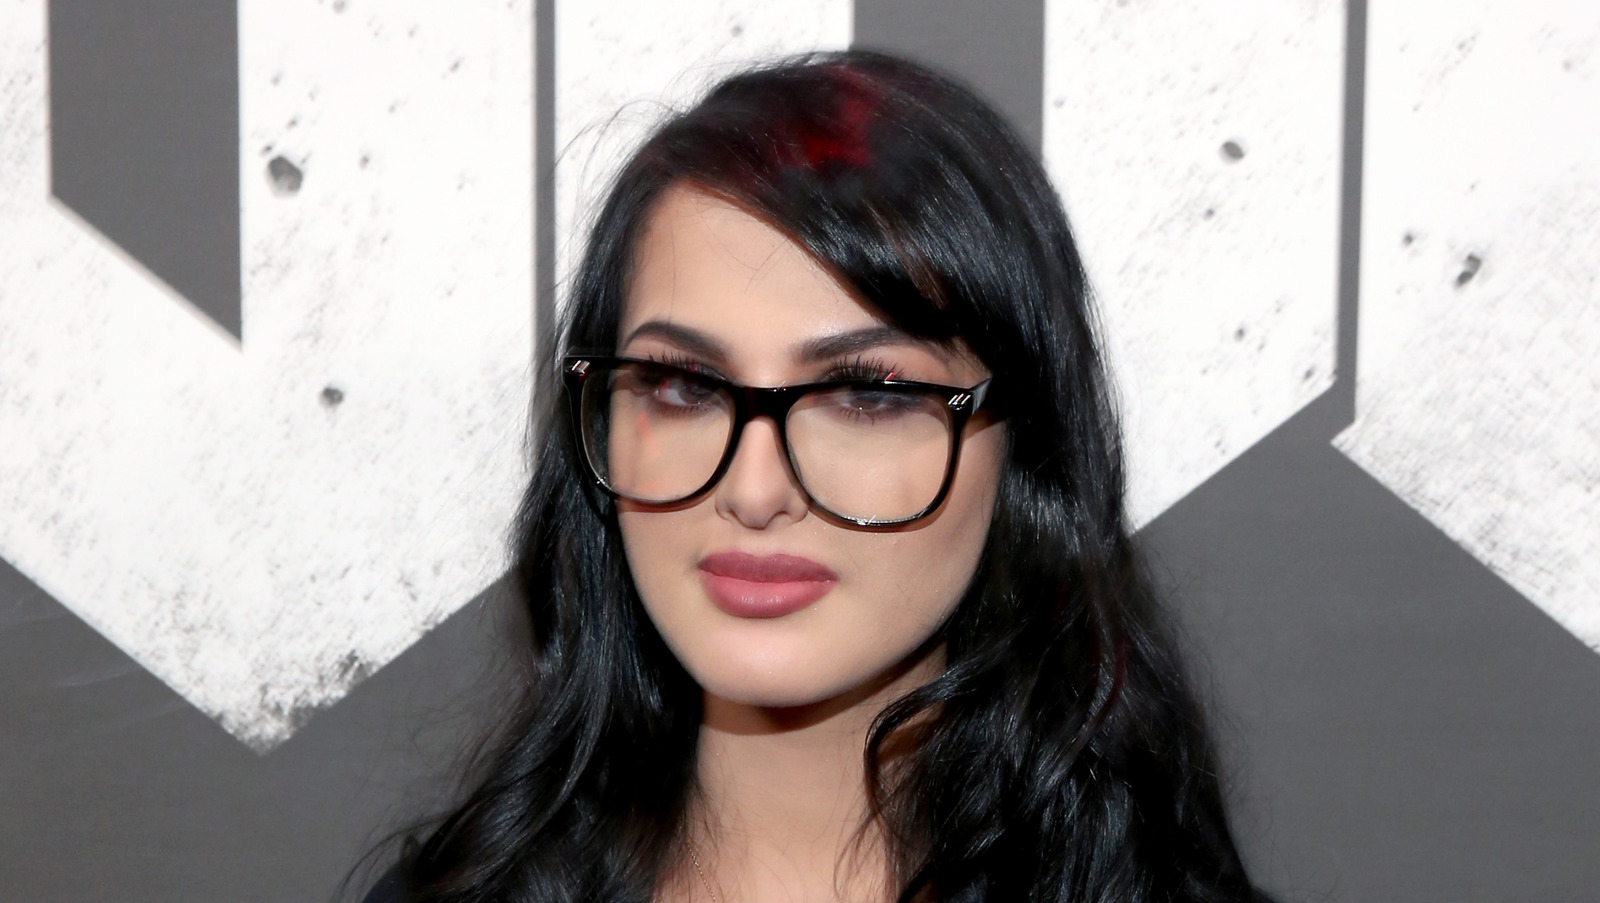 The 31-year old son of father (?) and mother(?) Sssniperwolf in 2023 photo. Sssniperwolf earned a  million dollar salary - leaving the net worth at  million in 2023